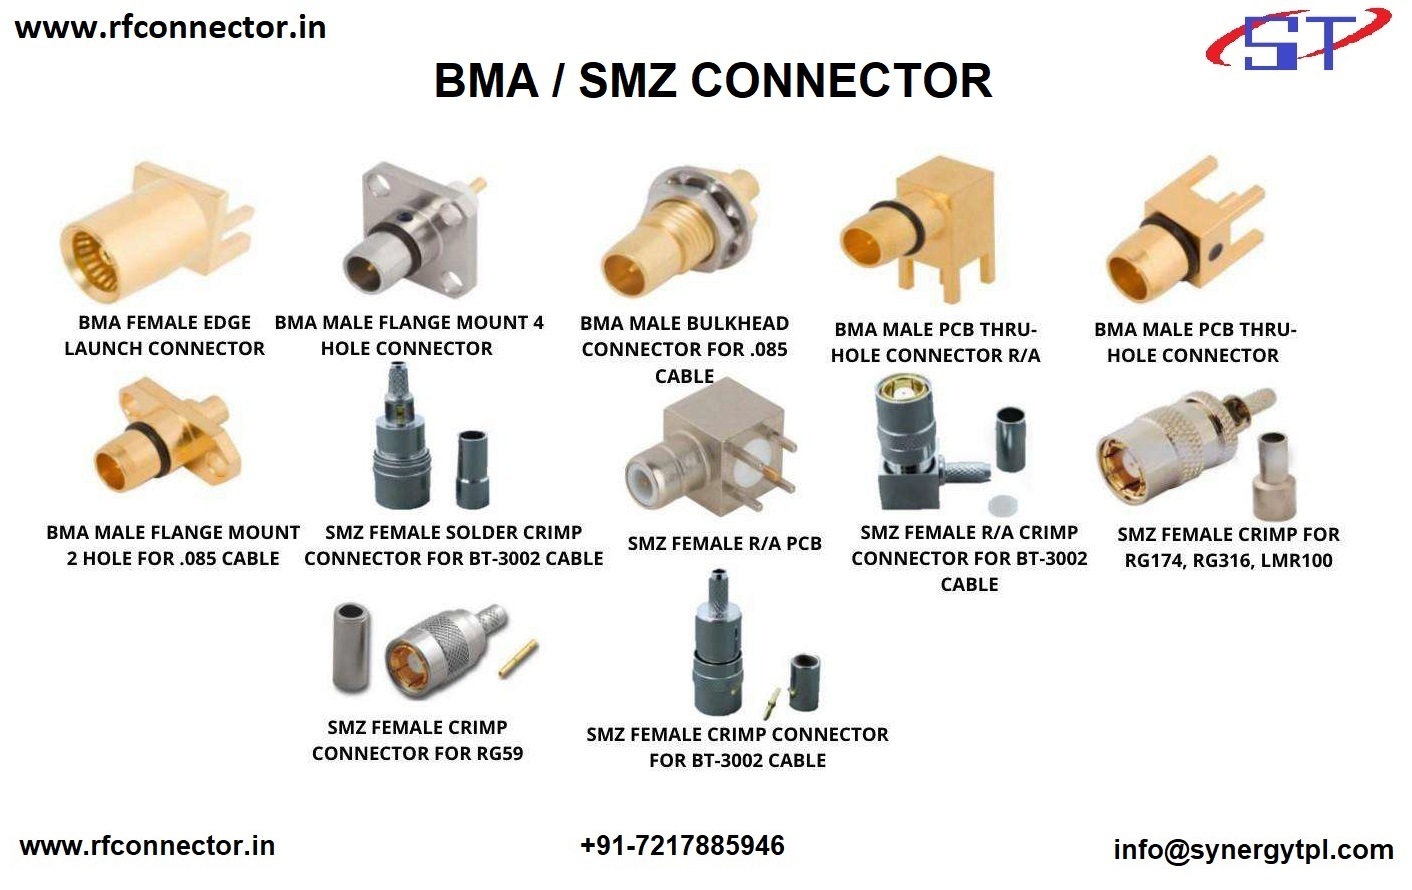 SMA male crimp connector for LMR 400 cable